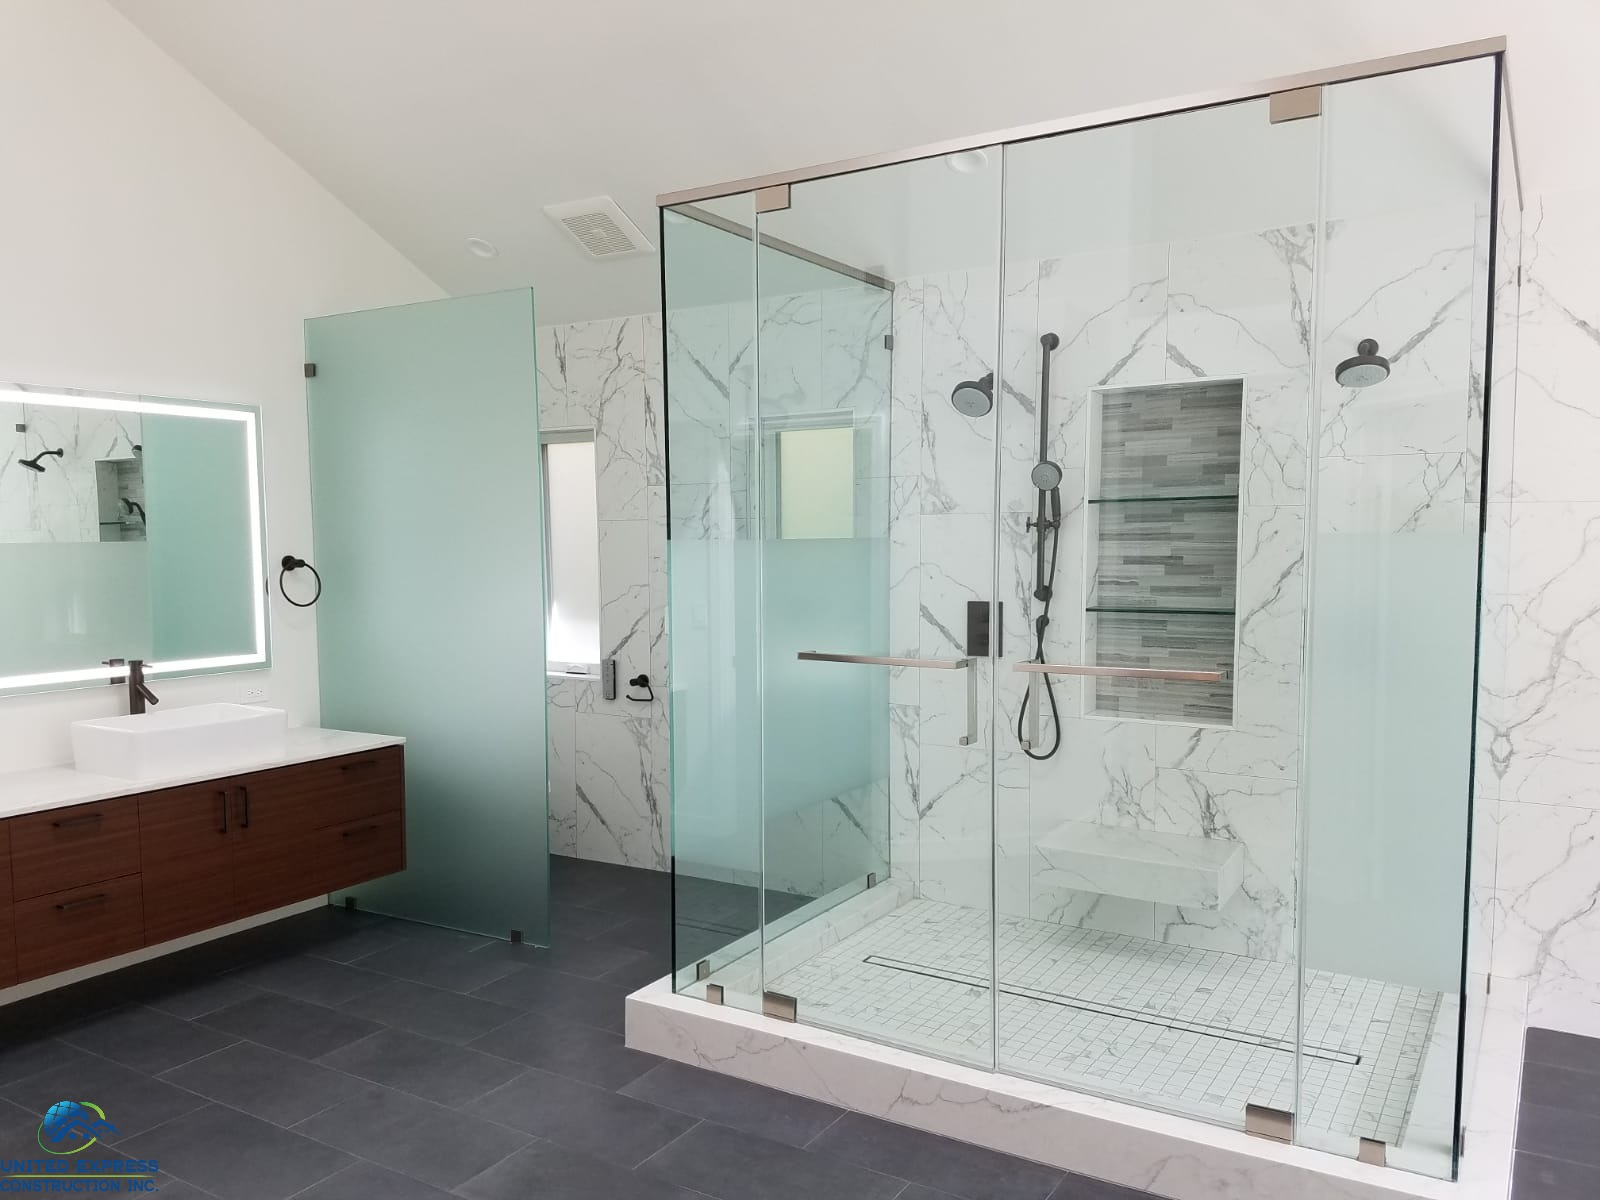 A modern bathroom with marble walled shower enclosure